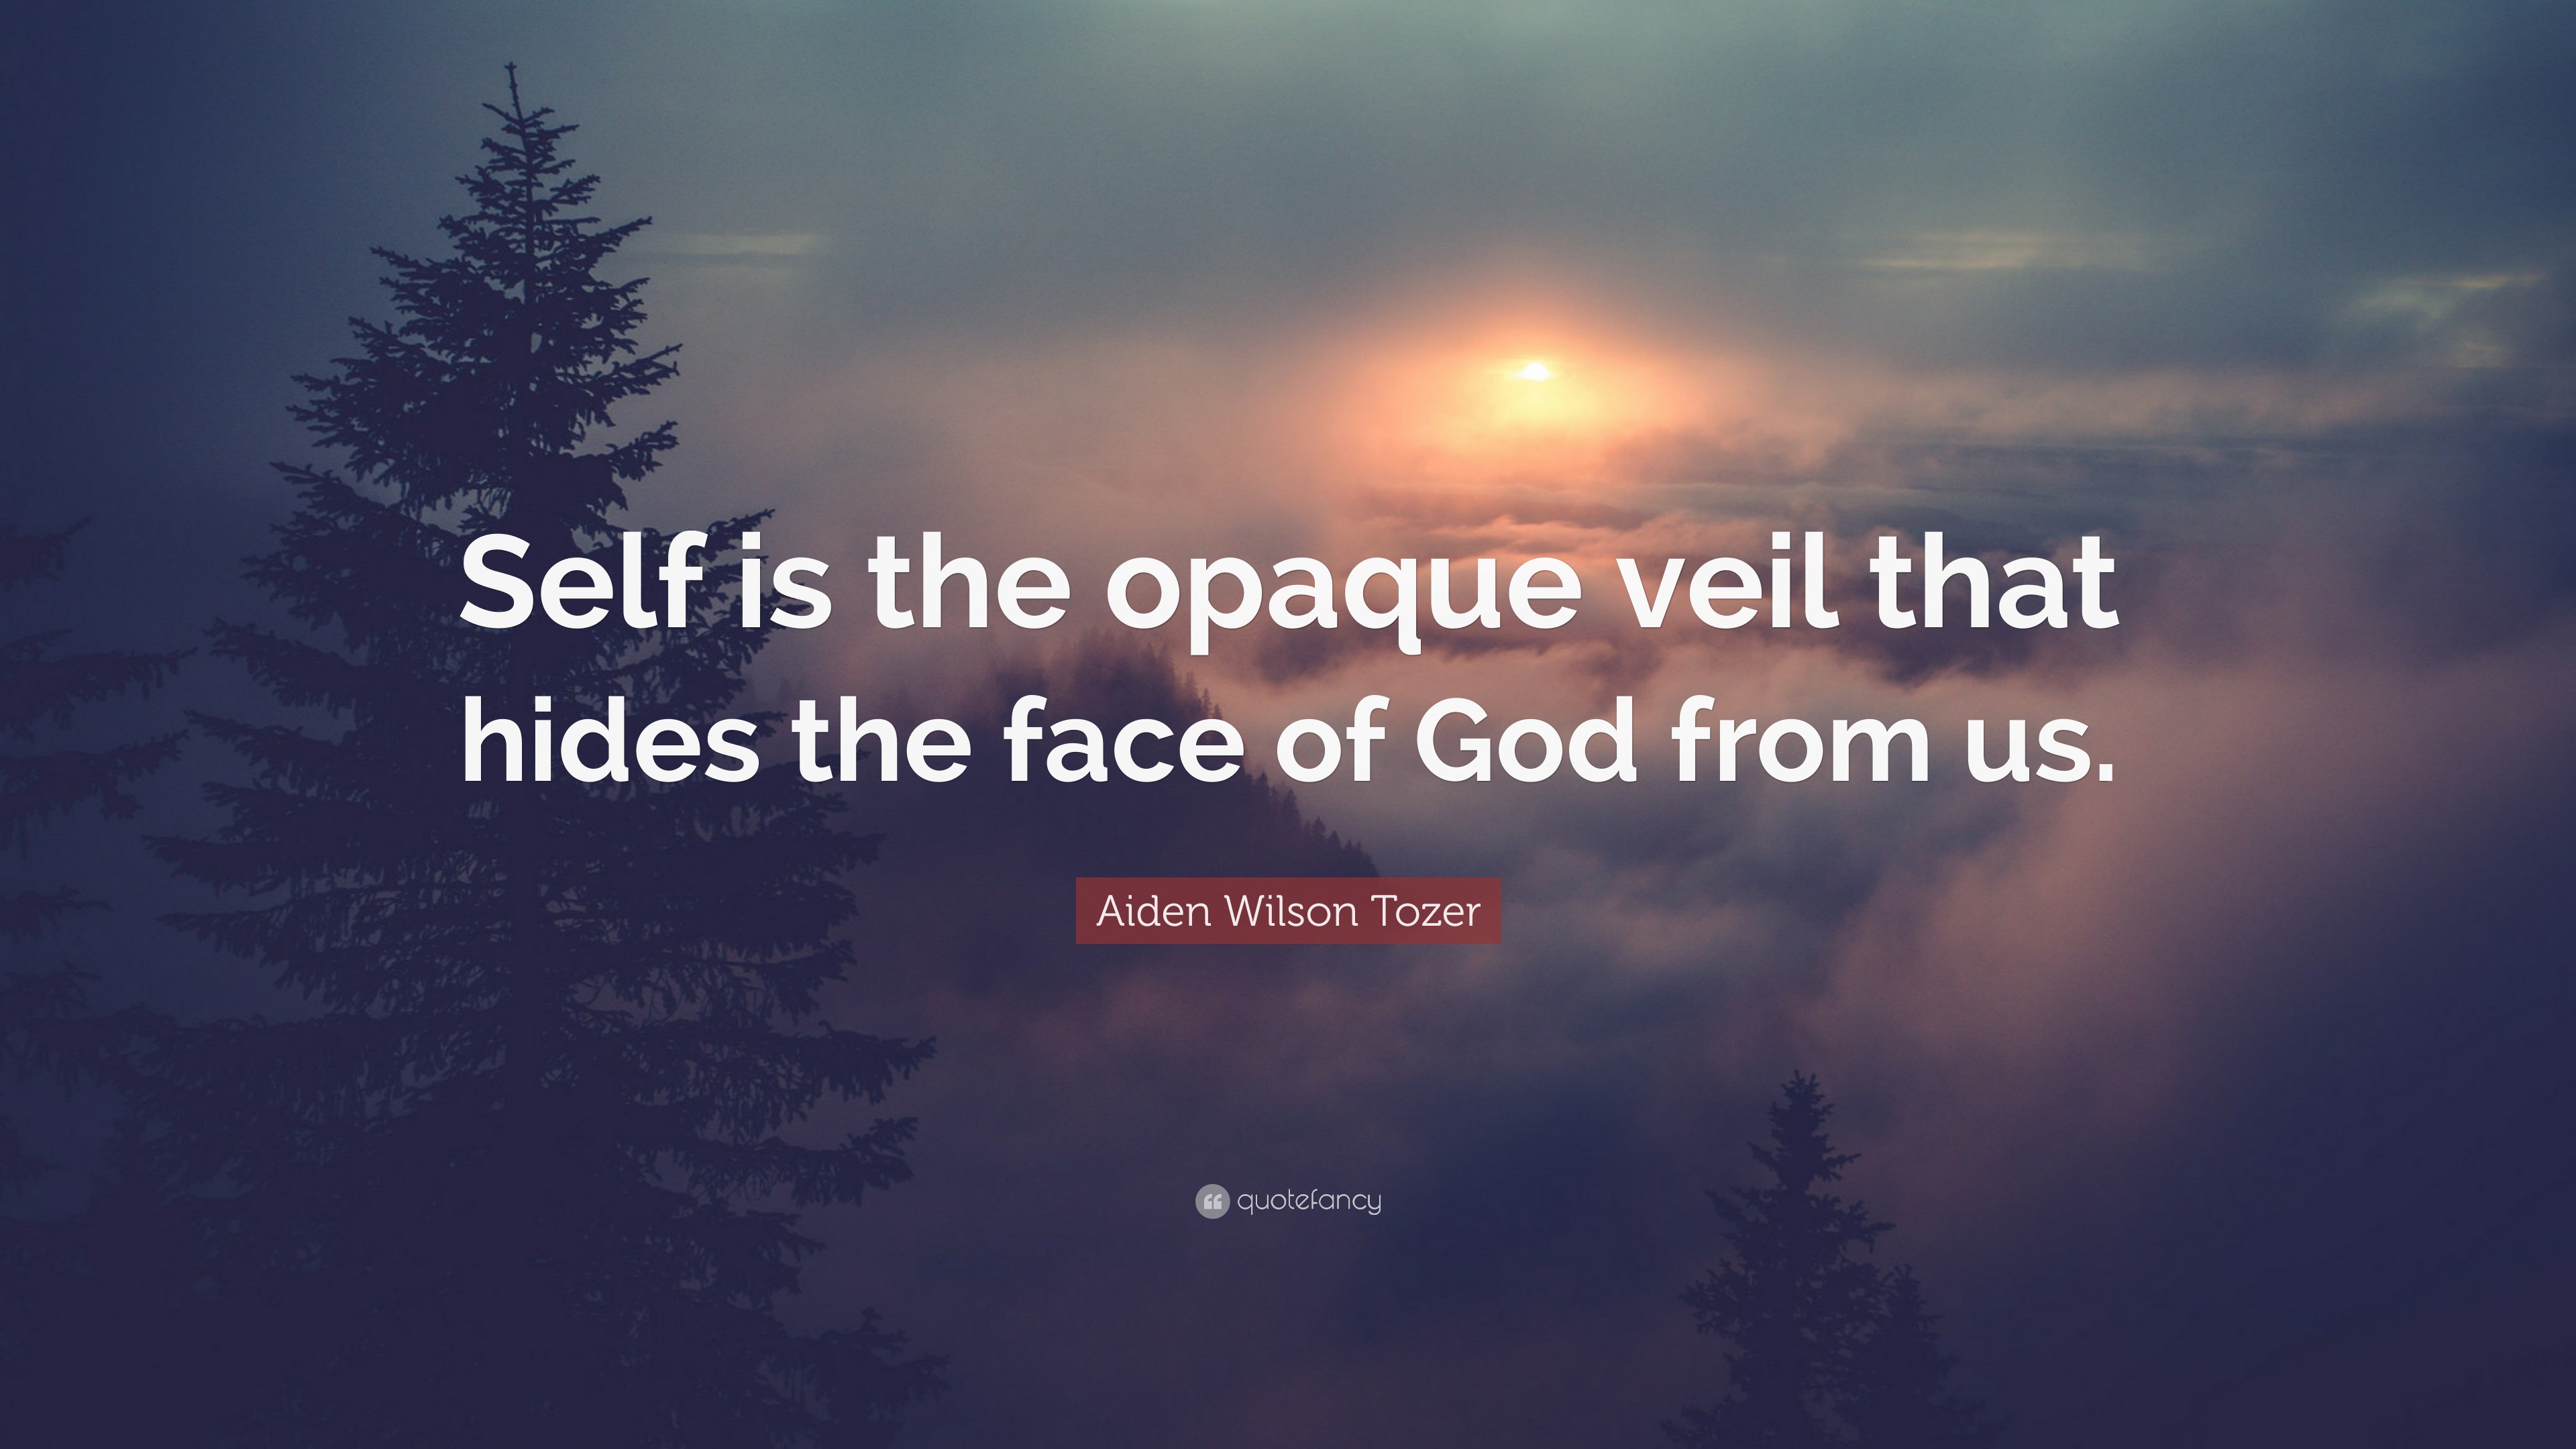 Aiden Wilson Tozer Quote: “Self is the